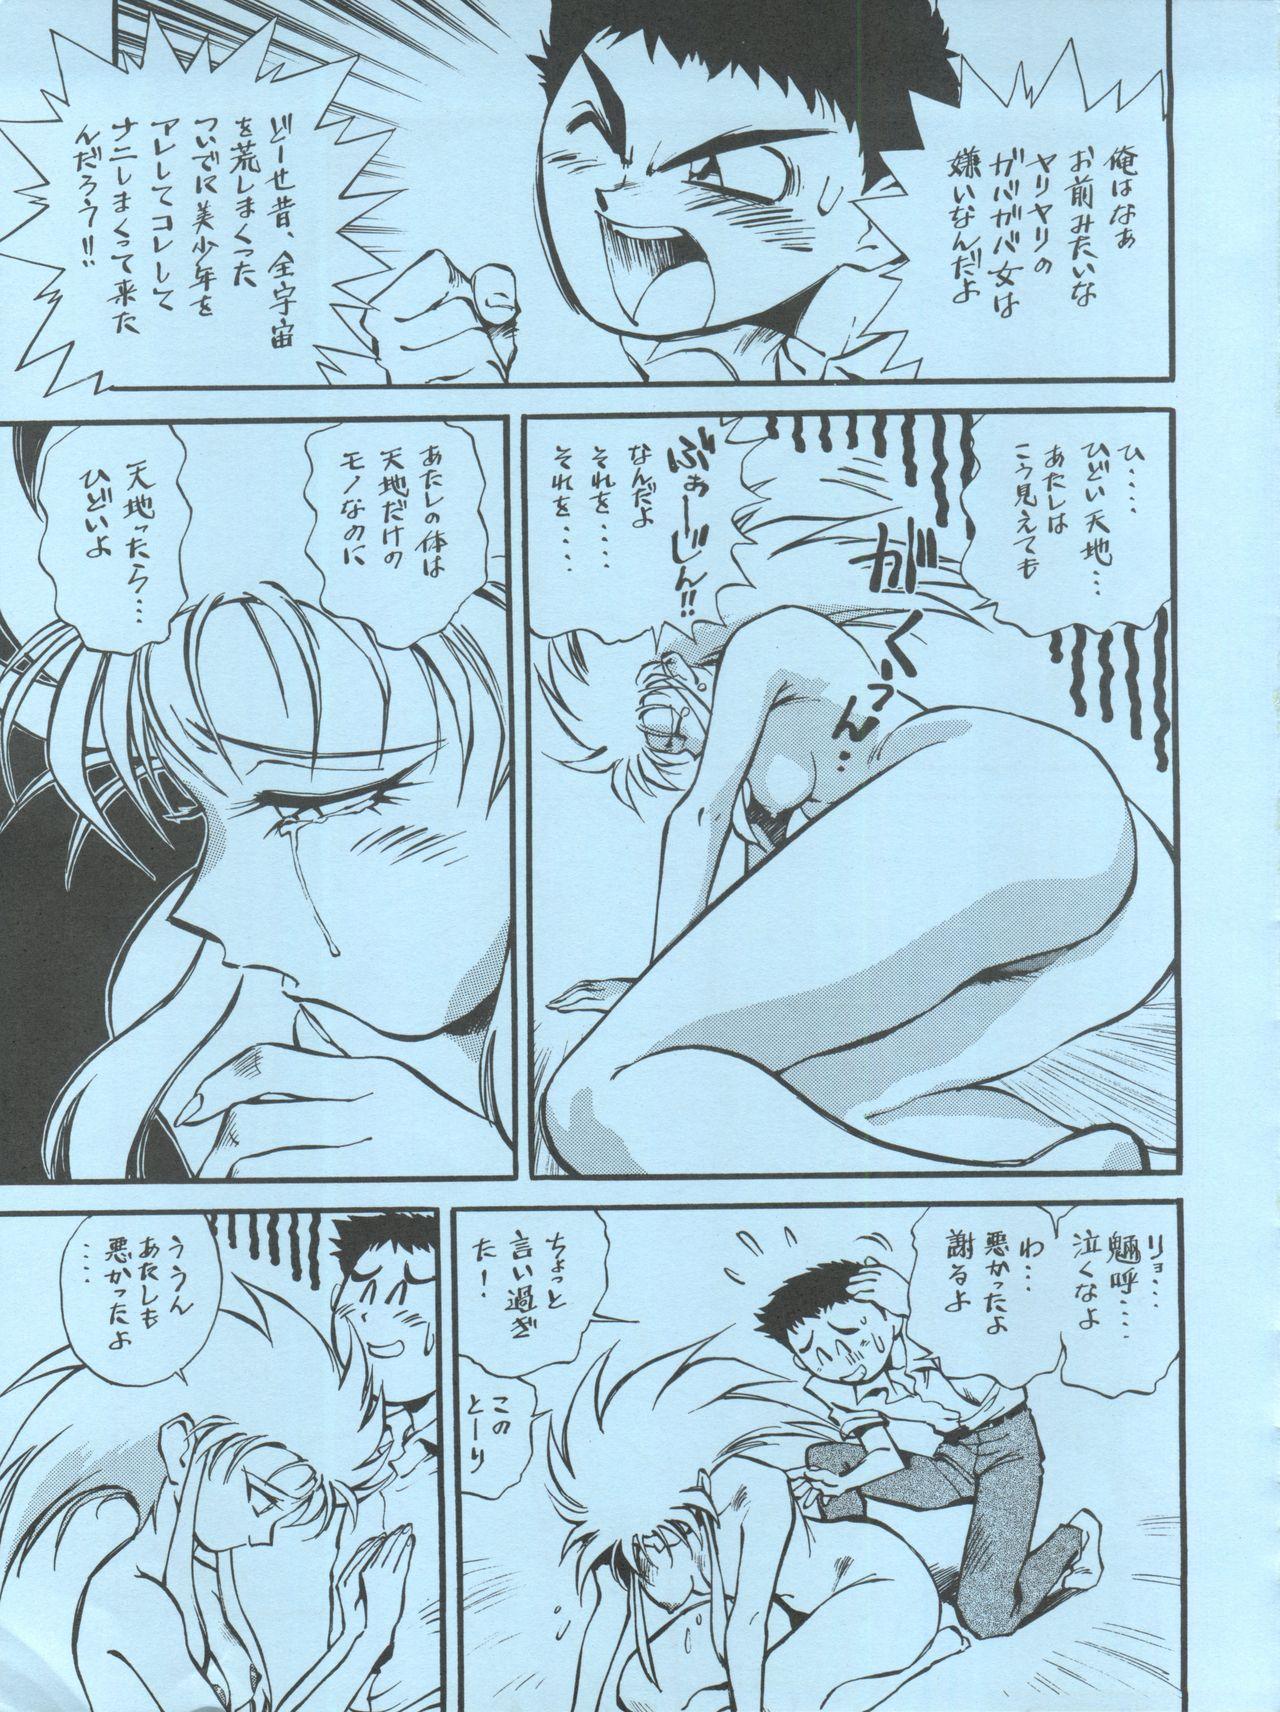 Uncensored LOOK OUT 27 - Sailor moon Street fighter Tenchi muyo Giant robo City hunter Taiyou no yuusha fighbird Dick Sucking Porn - Page 11